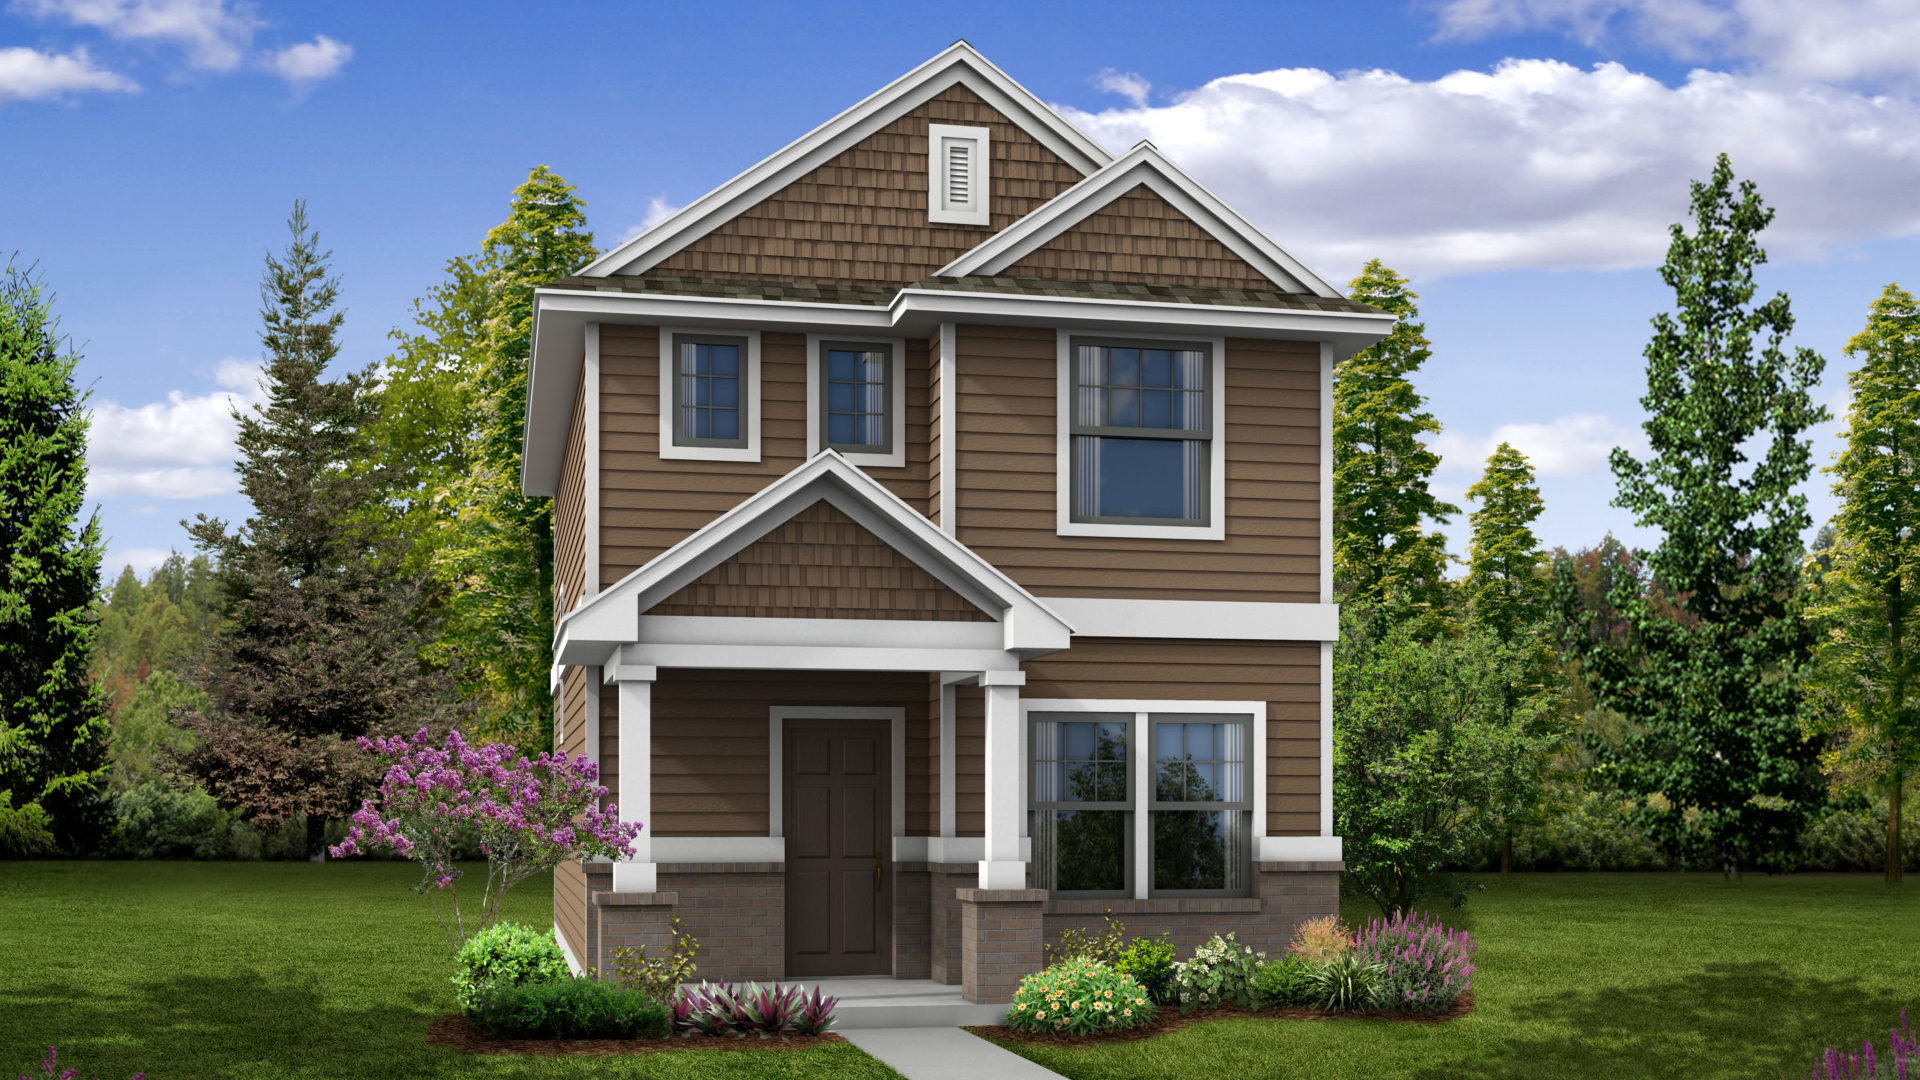 The Montgomery Elevation A Grande Estates - Coming Soon! New Homes in Bertram